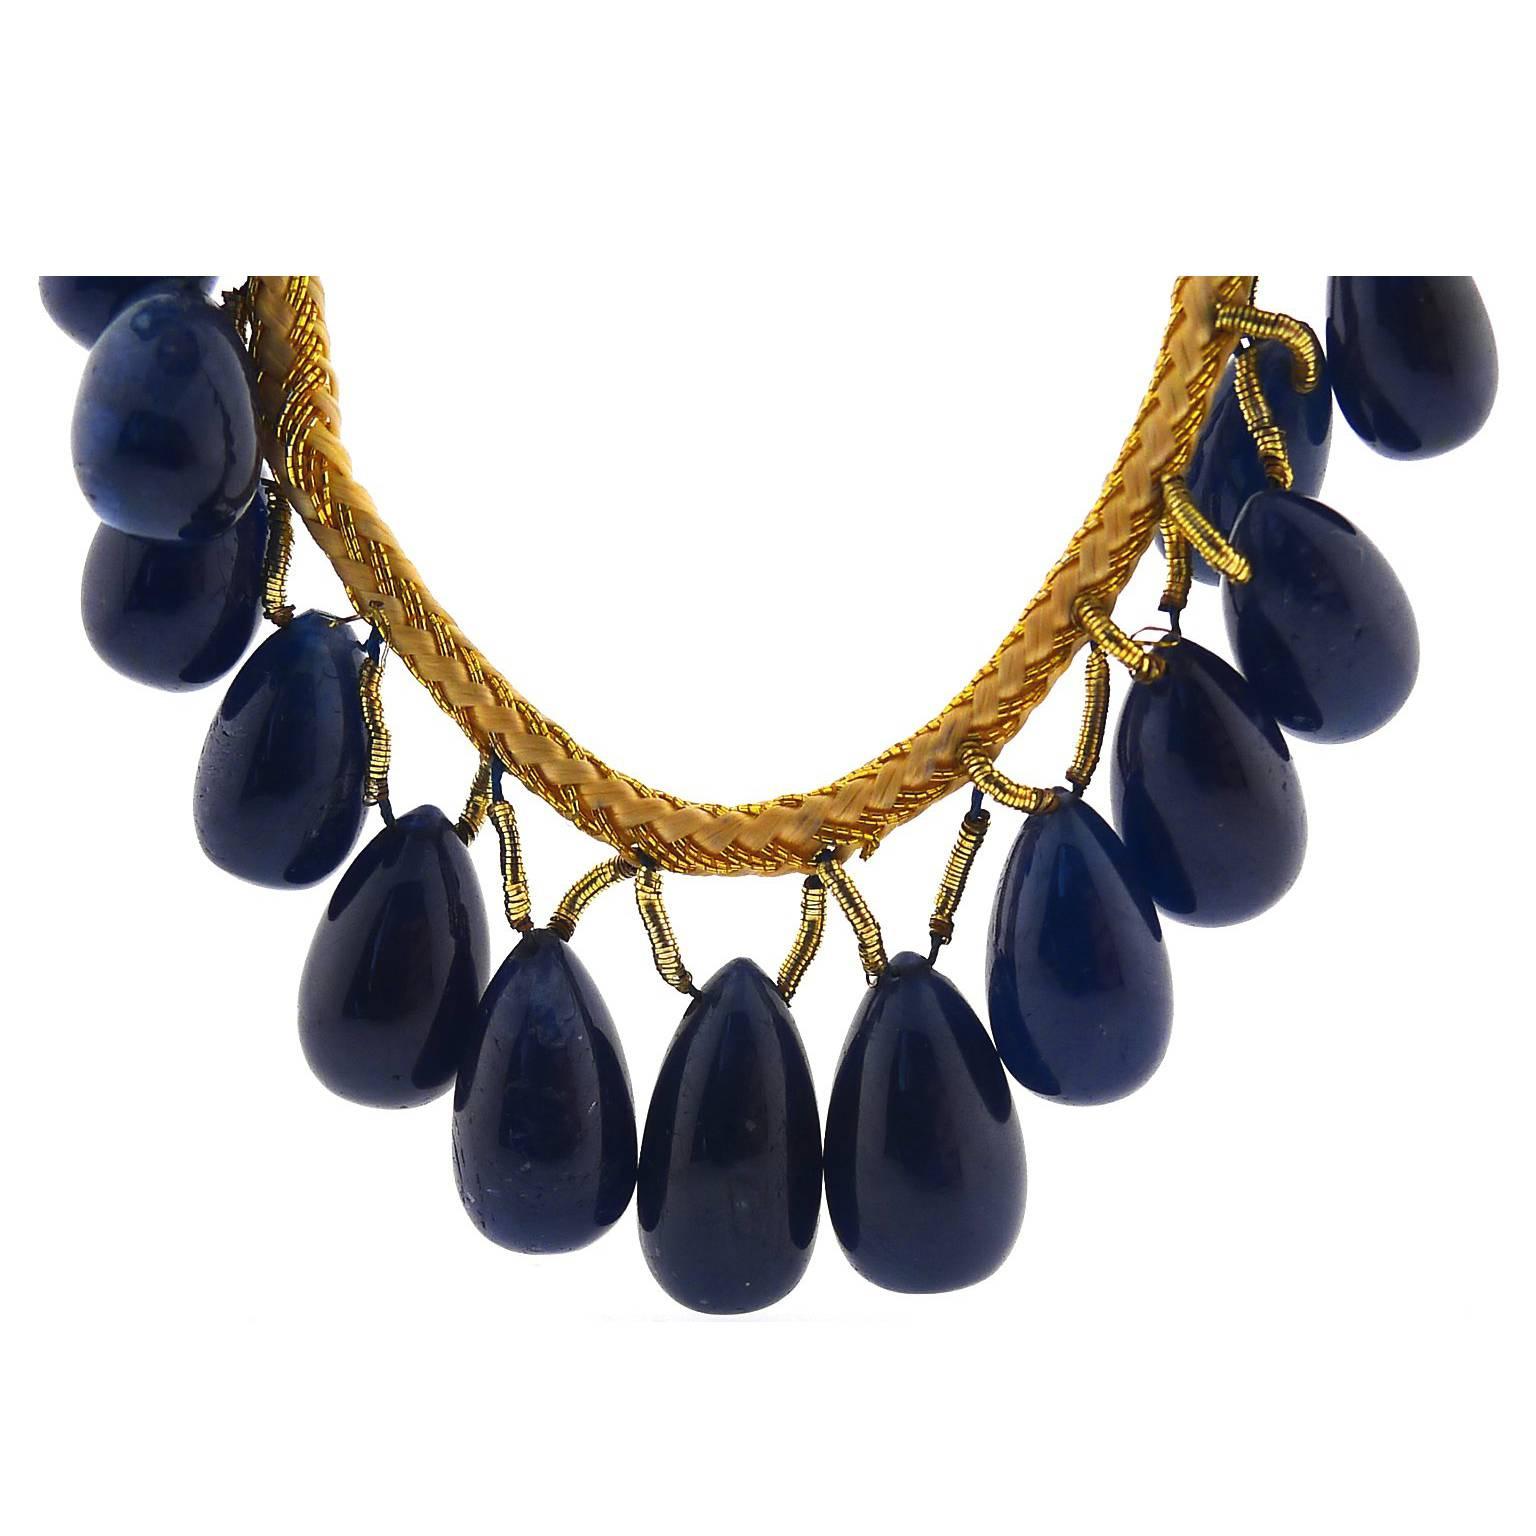 Polished Cabochon Sapphire Necklace For Sale